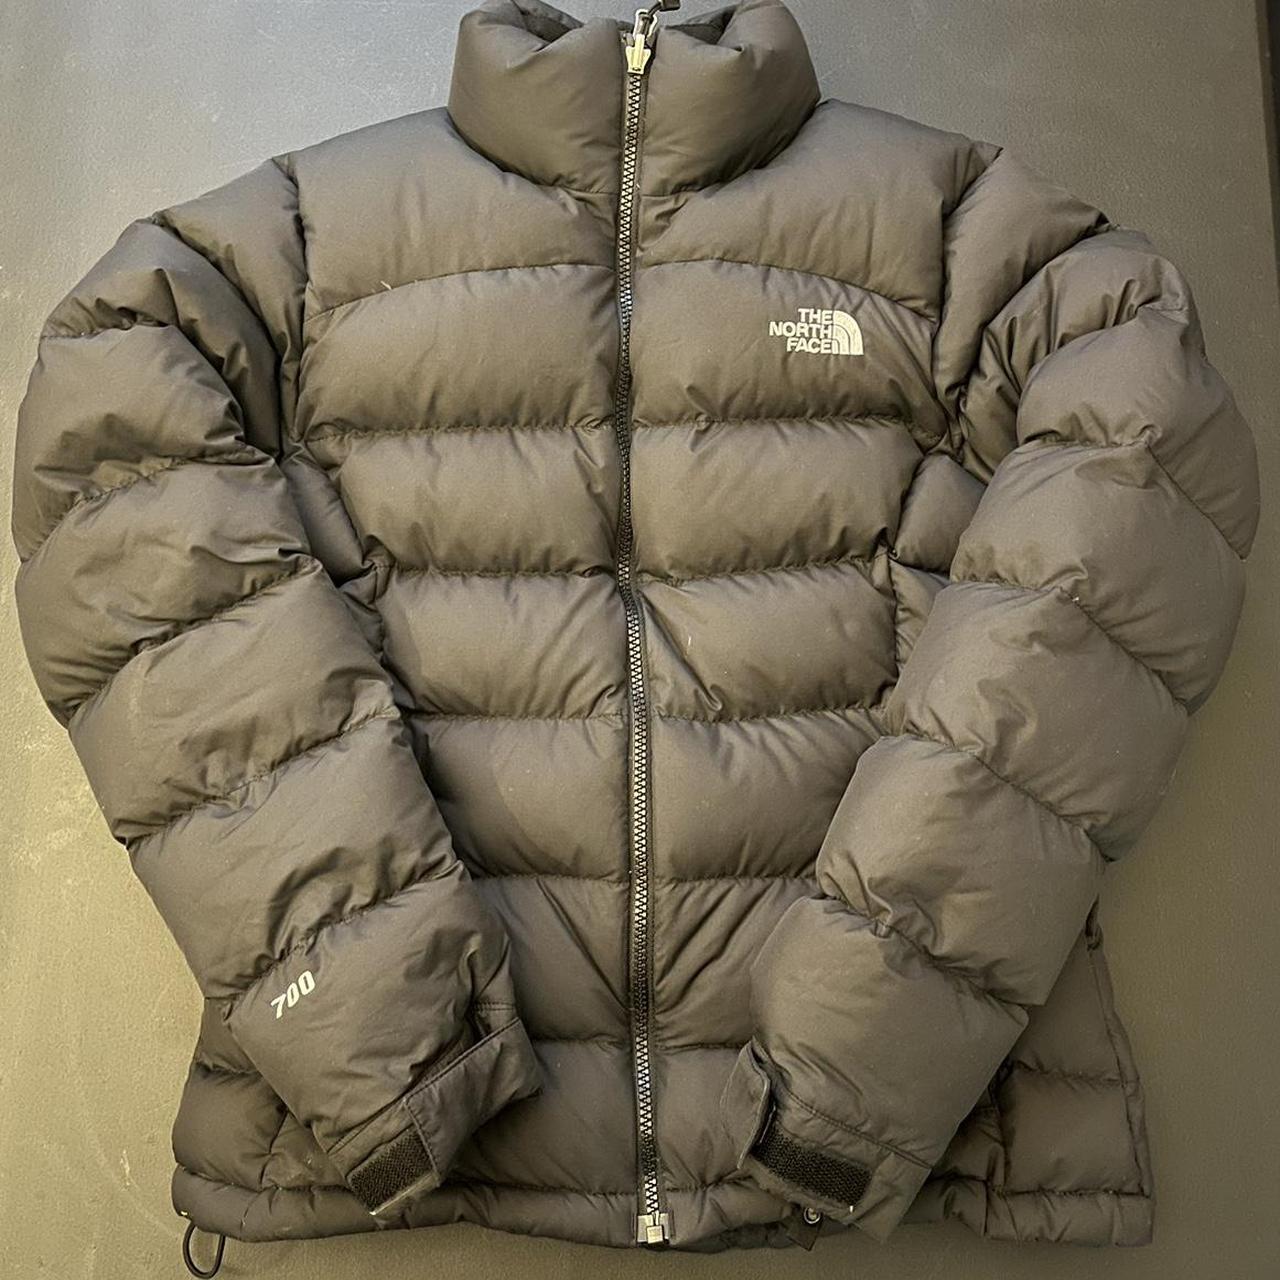 How A Brown The North Face Puffer Became Depop Gold